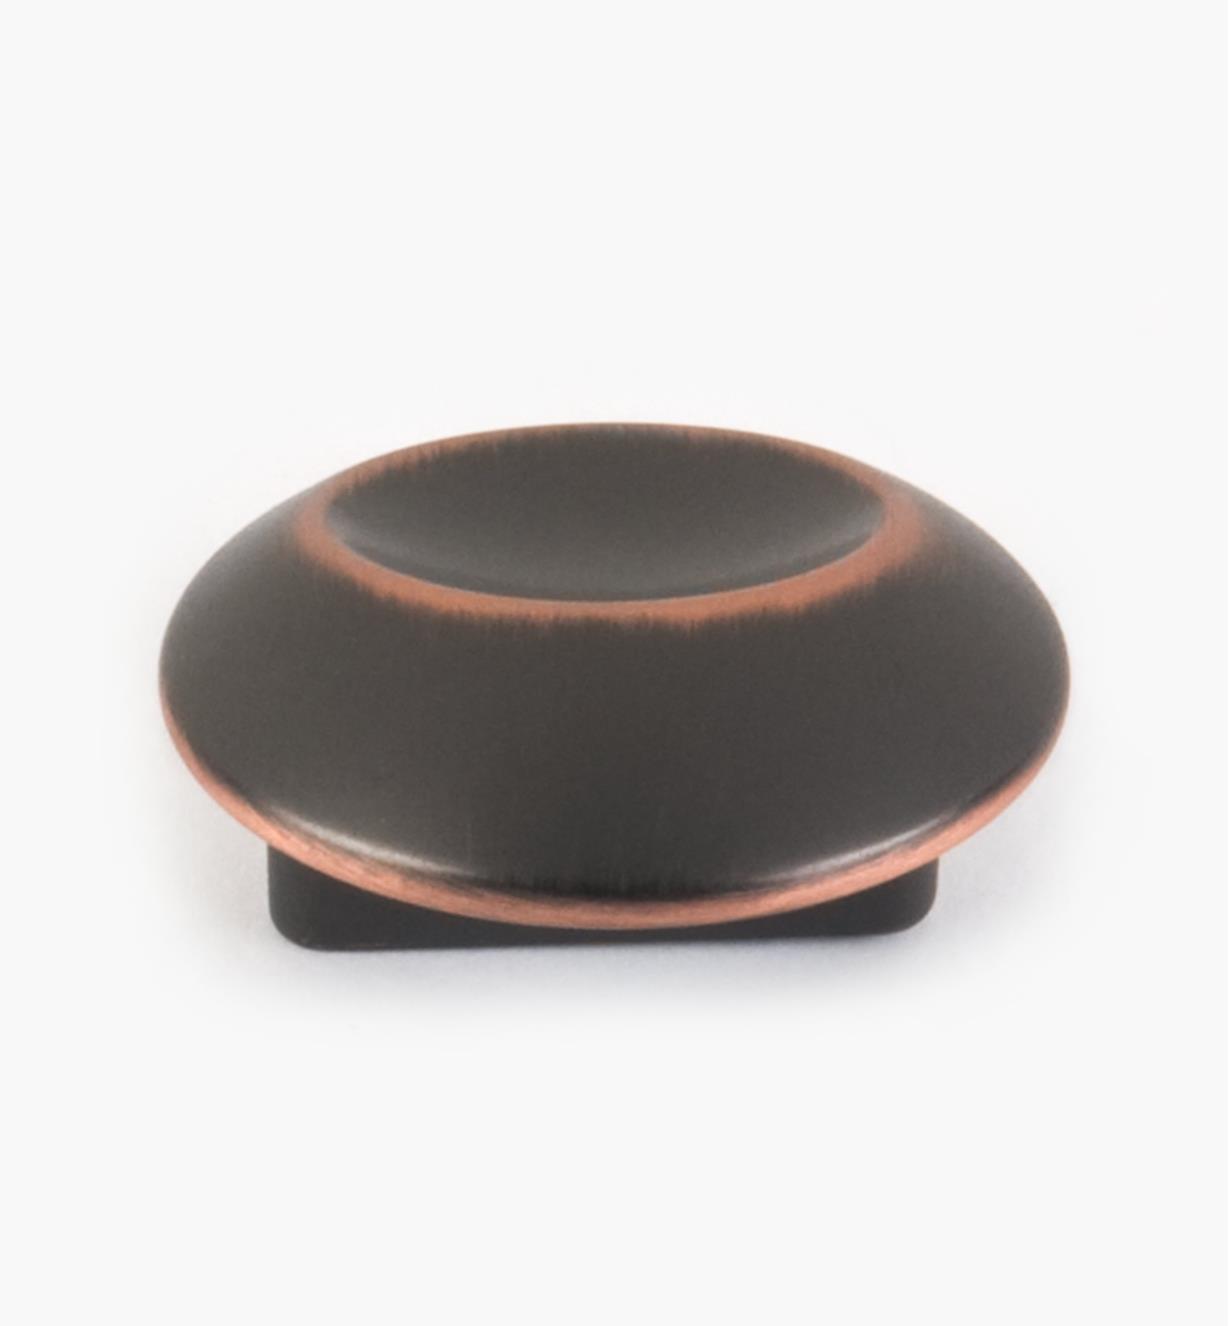 03W2282 -  Oil-Rubbed Bronze Highlight Finish 1 1/4" Off-Center Knob, each